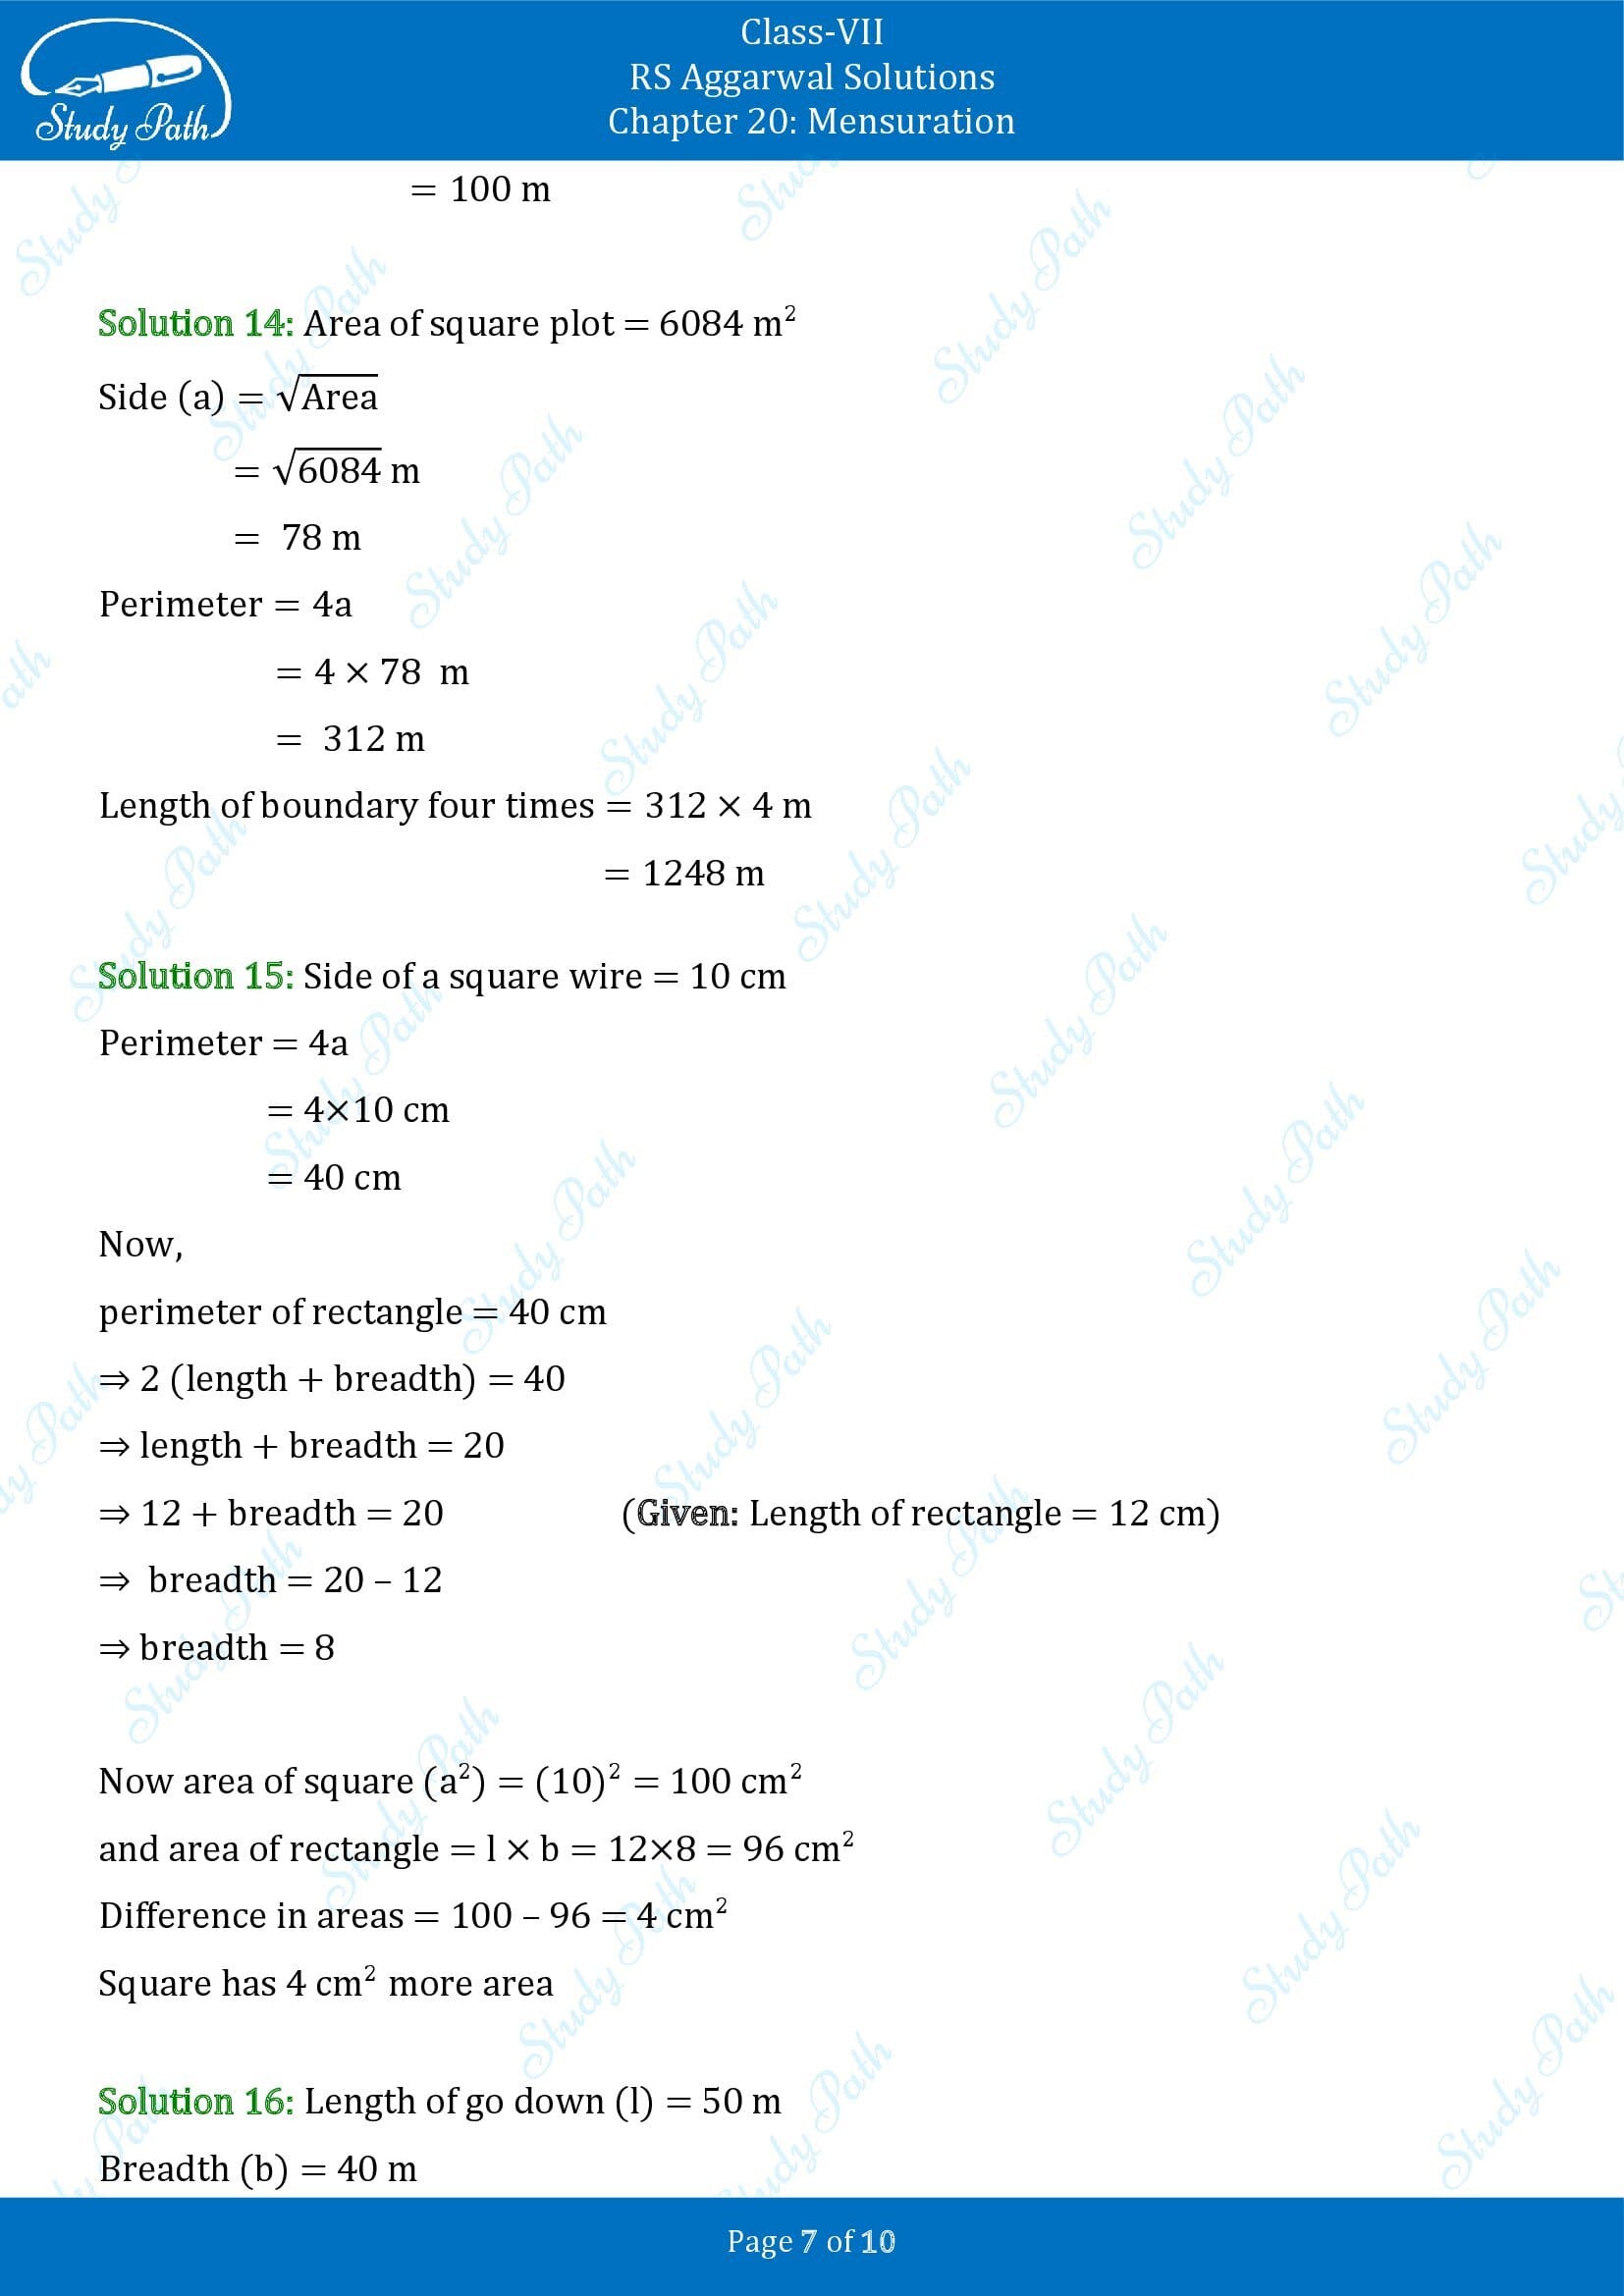 RS Aggarwal Solutions Class 7 Chapter 20 Mensuration Exercise 20A 00007